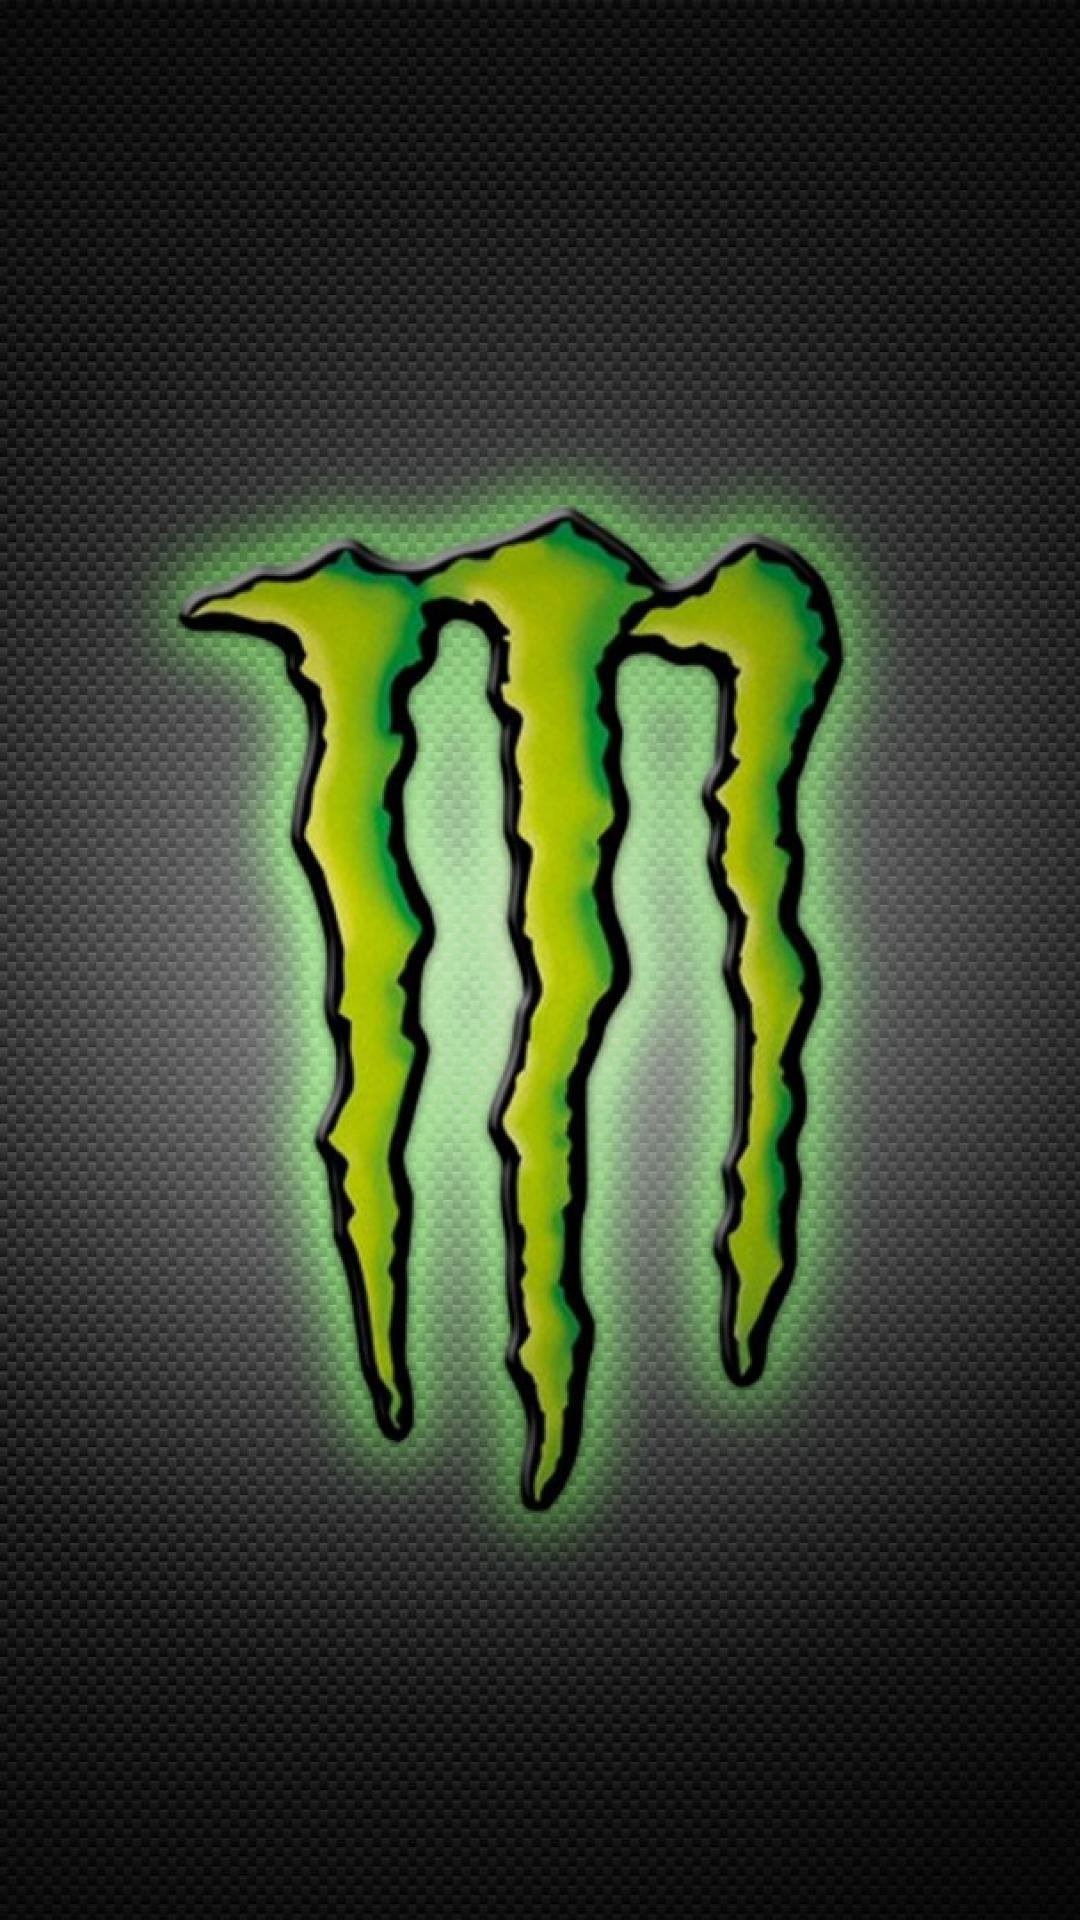 Monster Energy Wallpapers For Iphone Wallpaper Cave